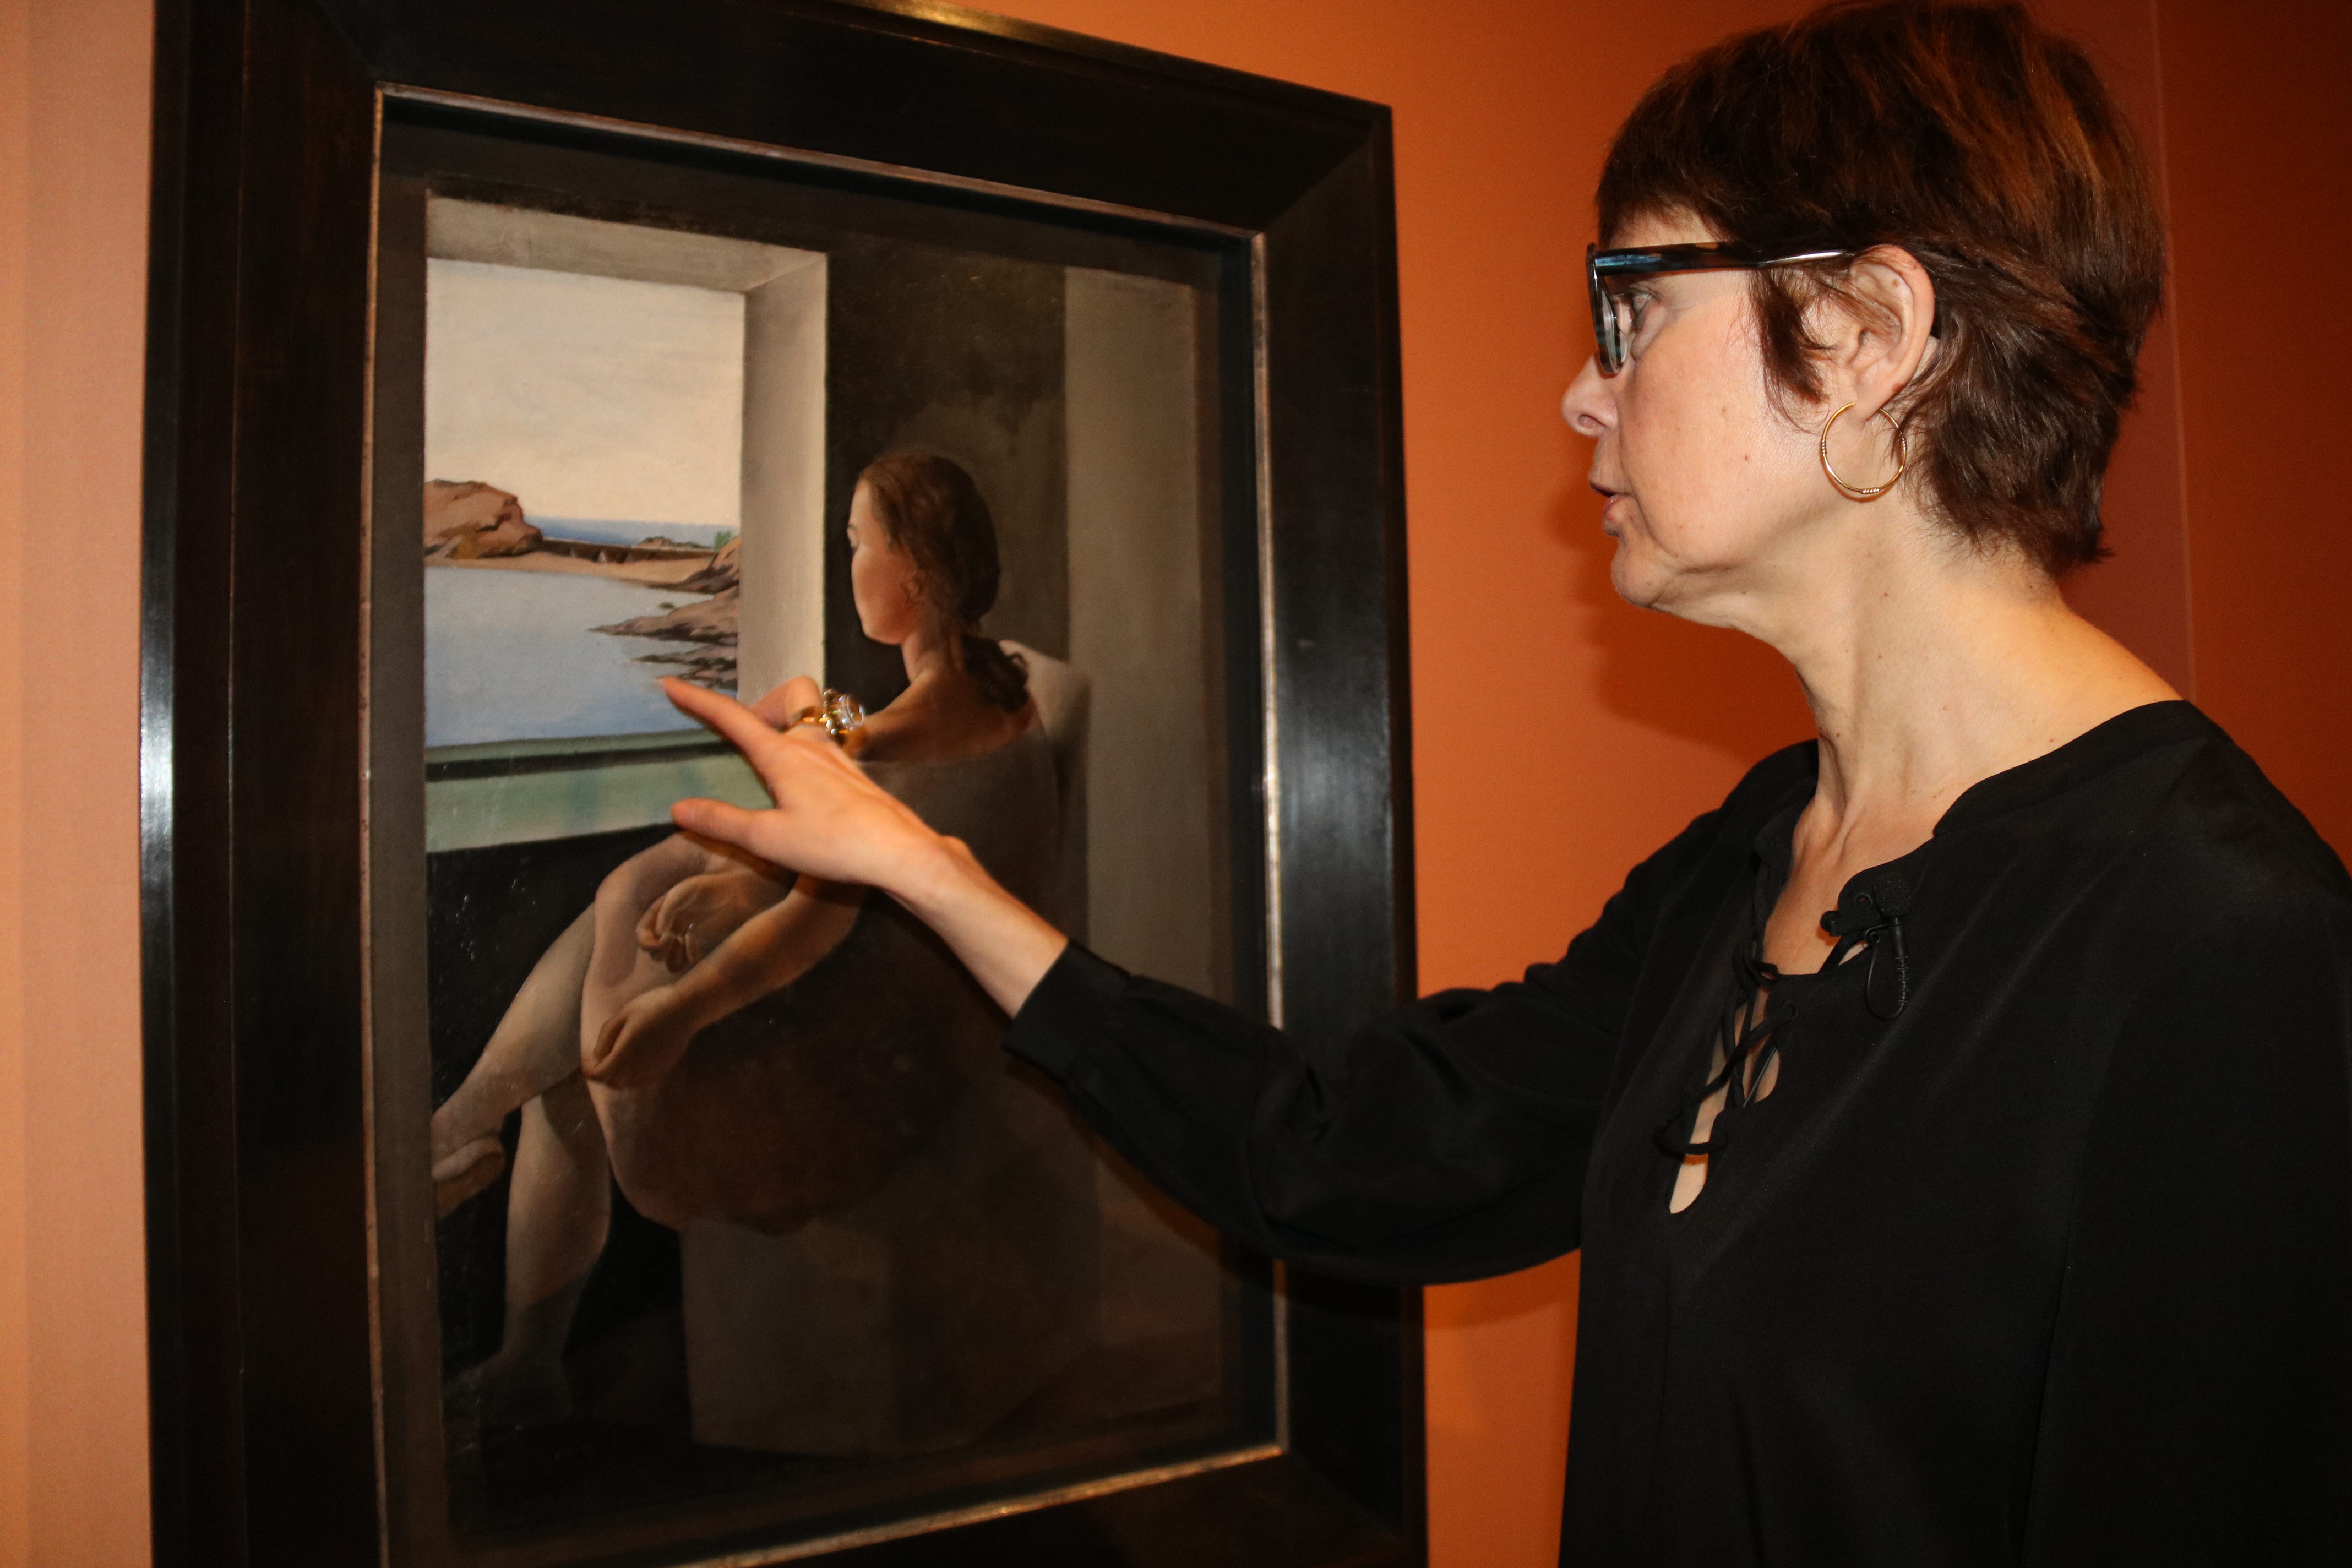 'Figure in profile' at the Dalí Museum in Figueres (by ACN)